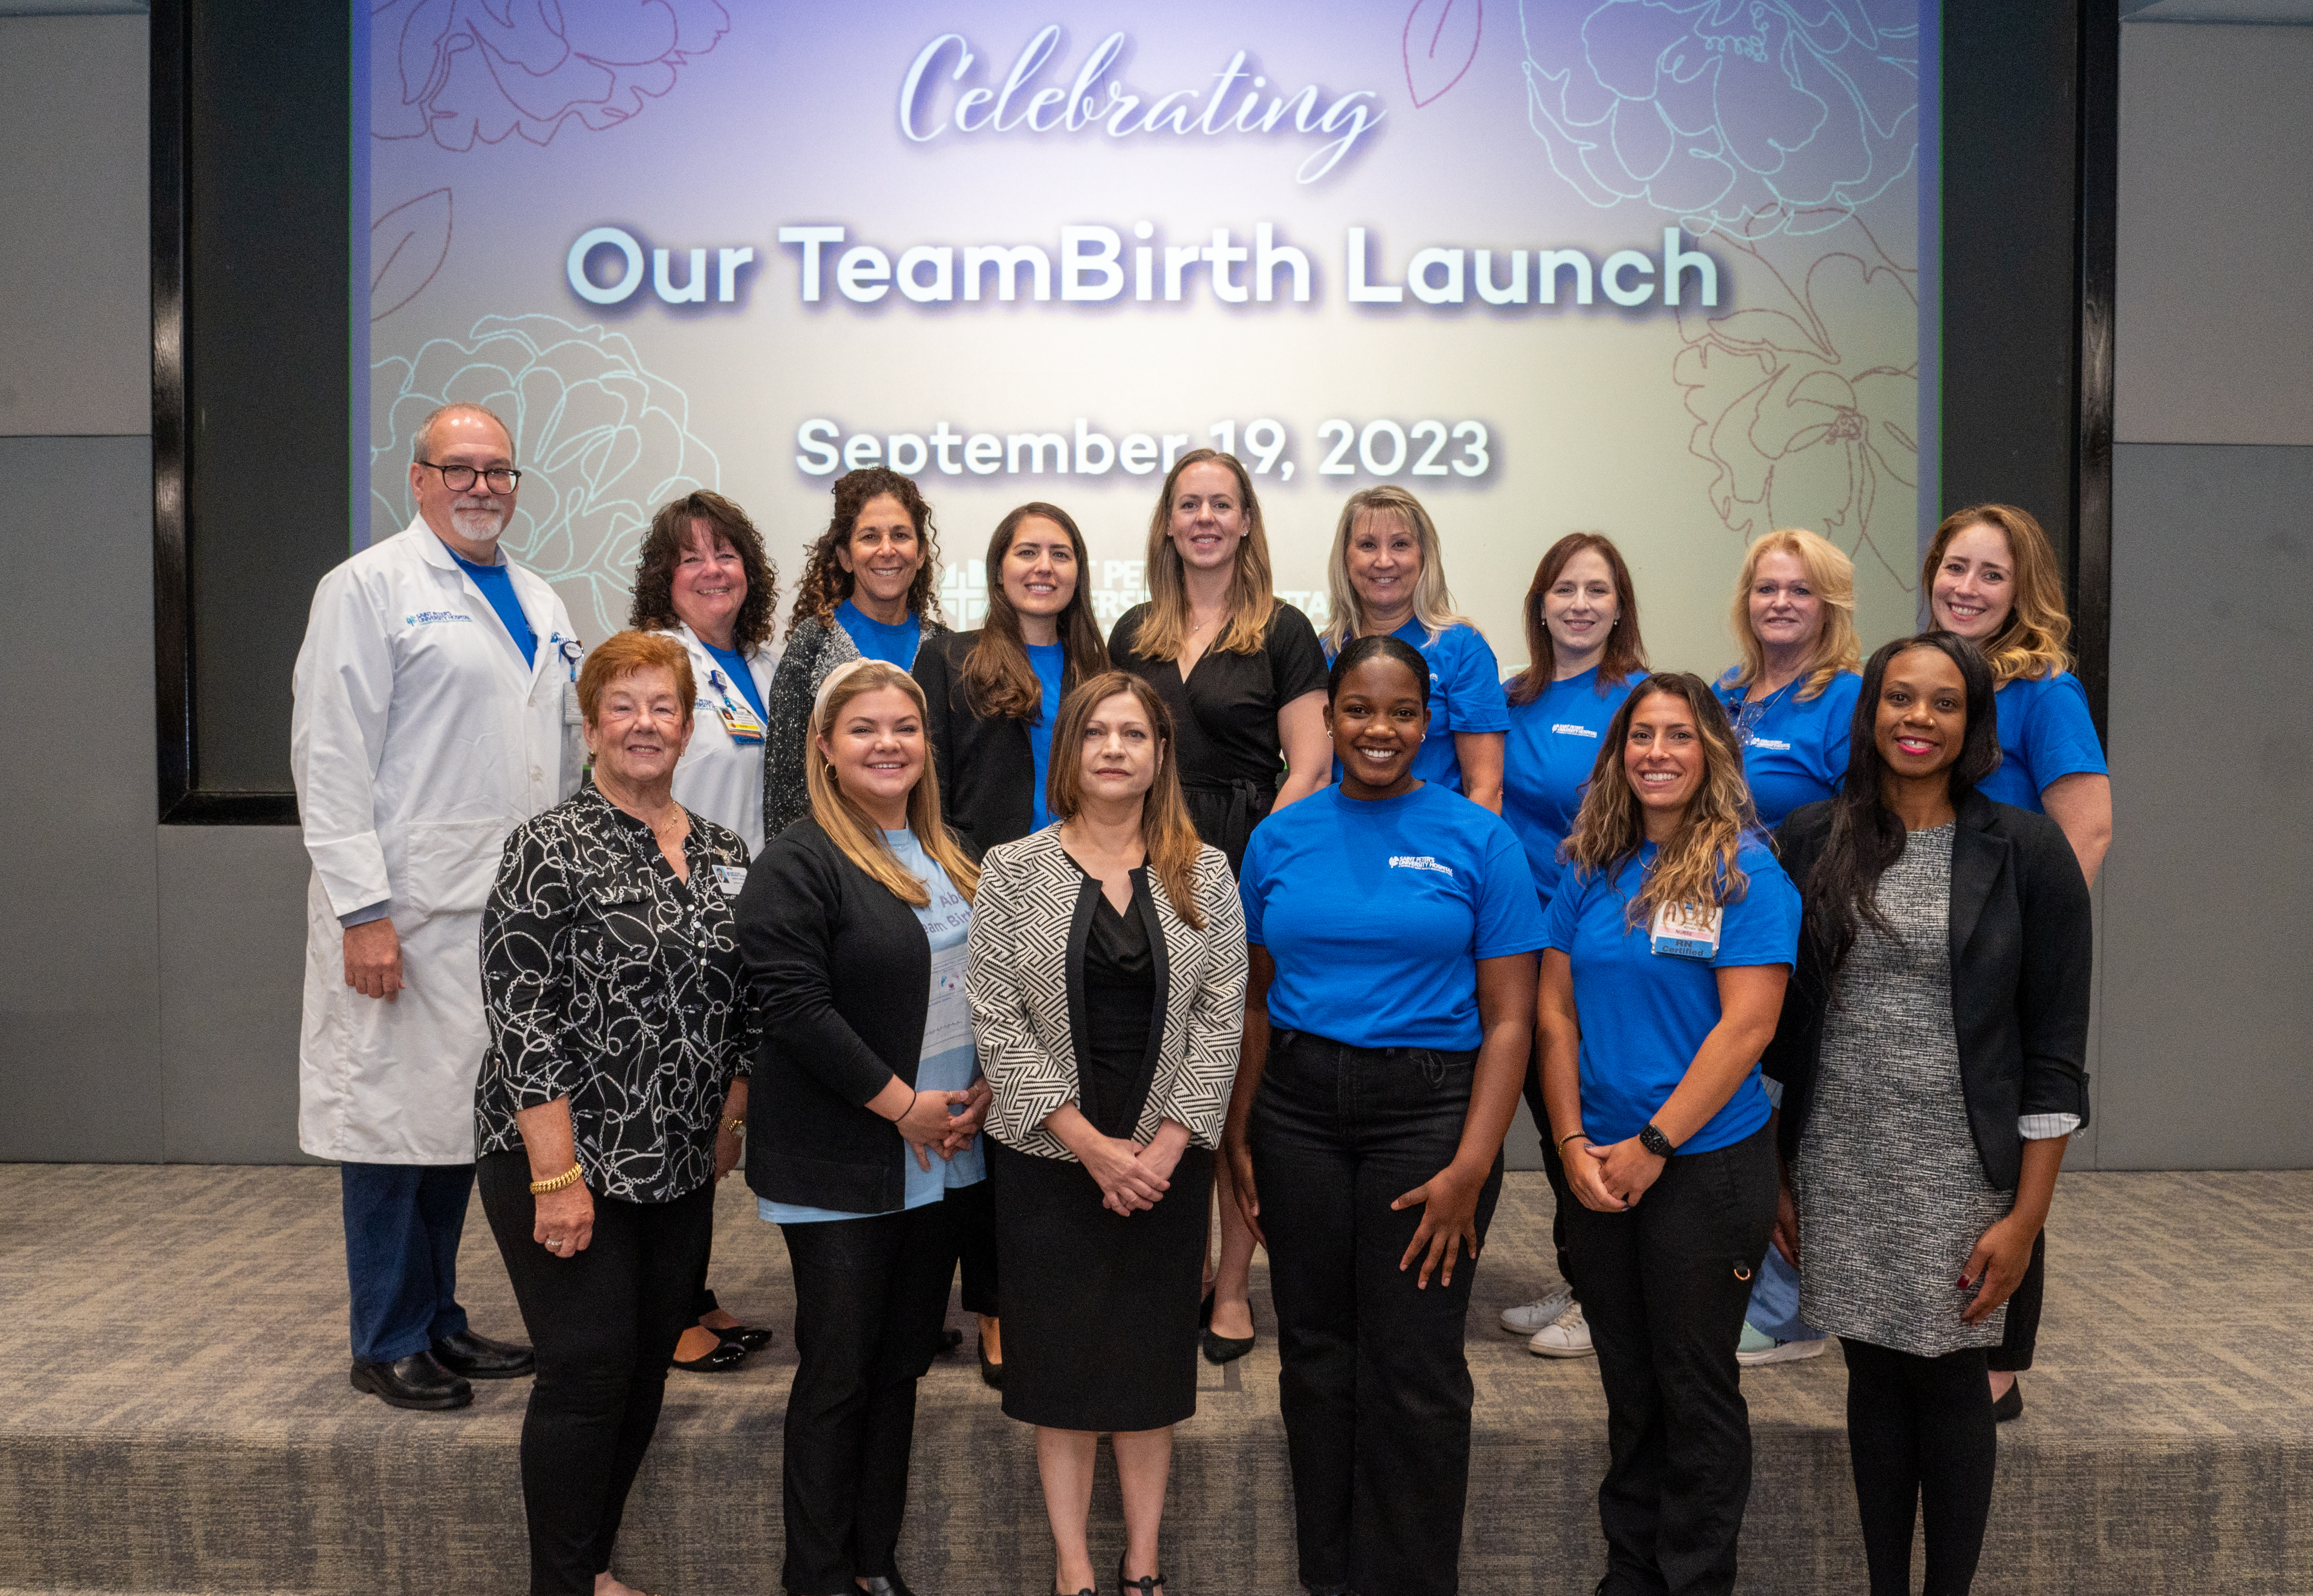 Saint Peter’s University Hospital to Launch “TeamBirth”  